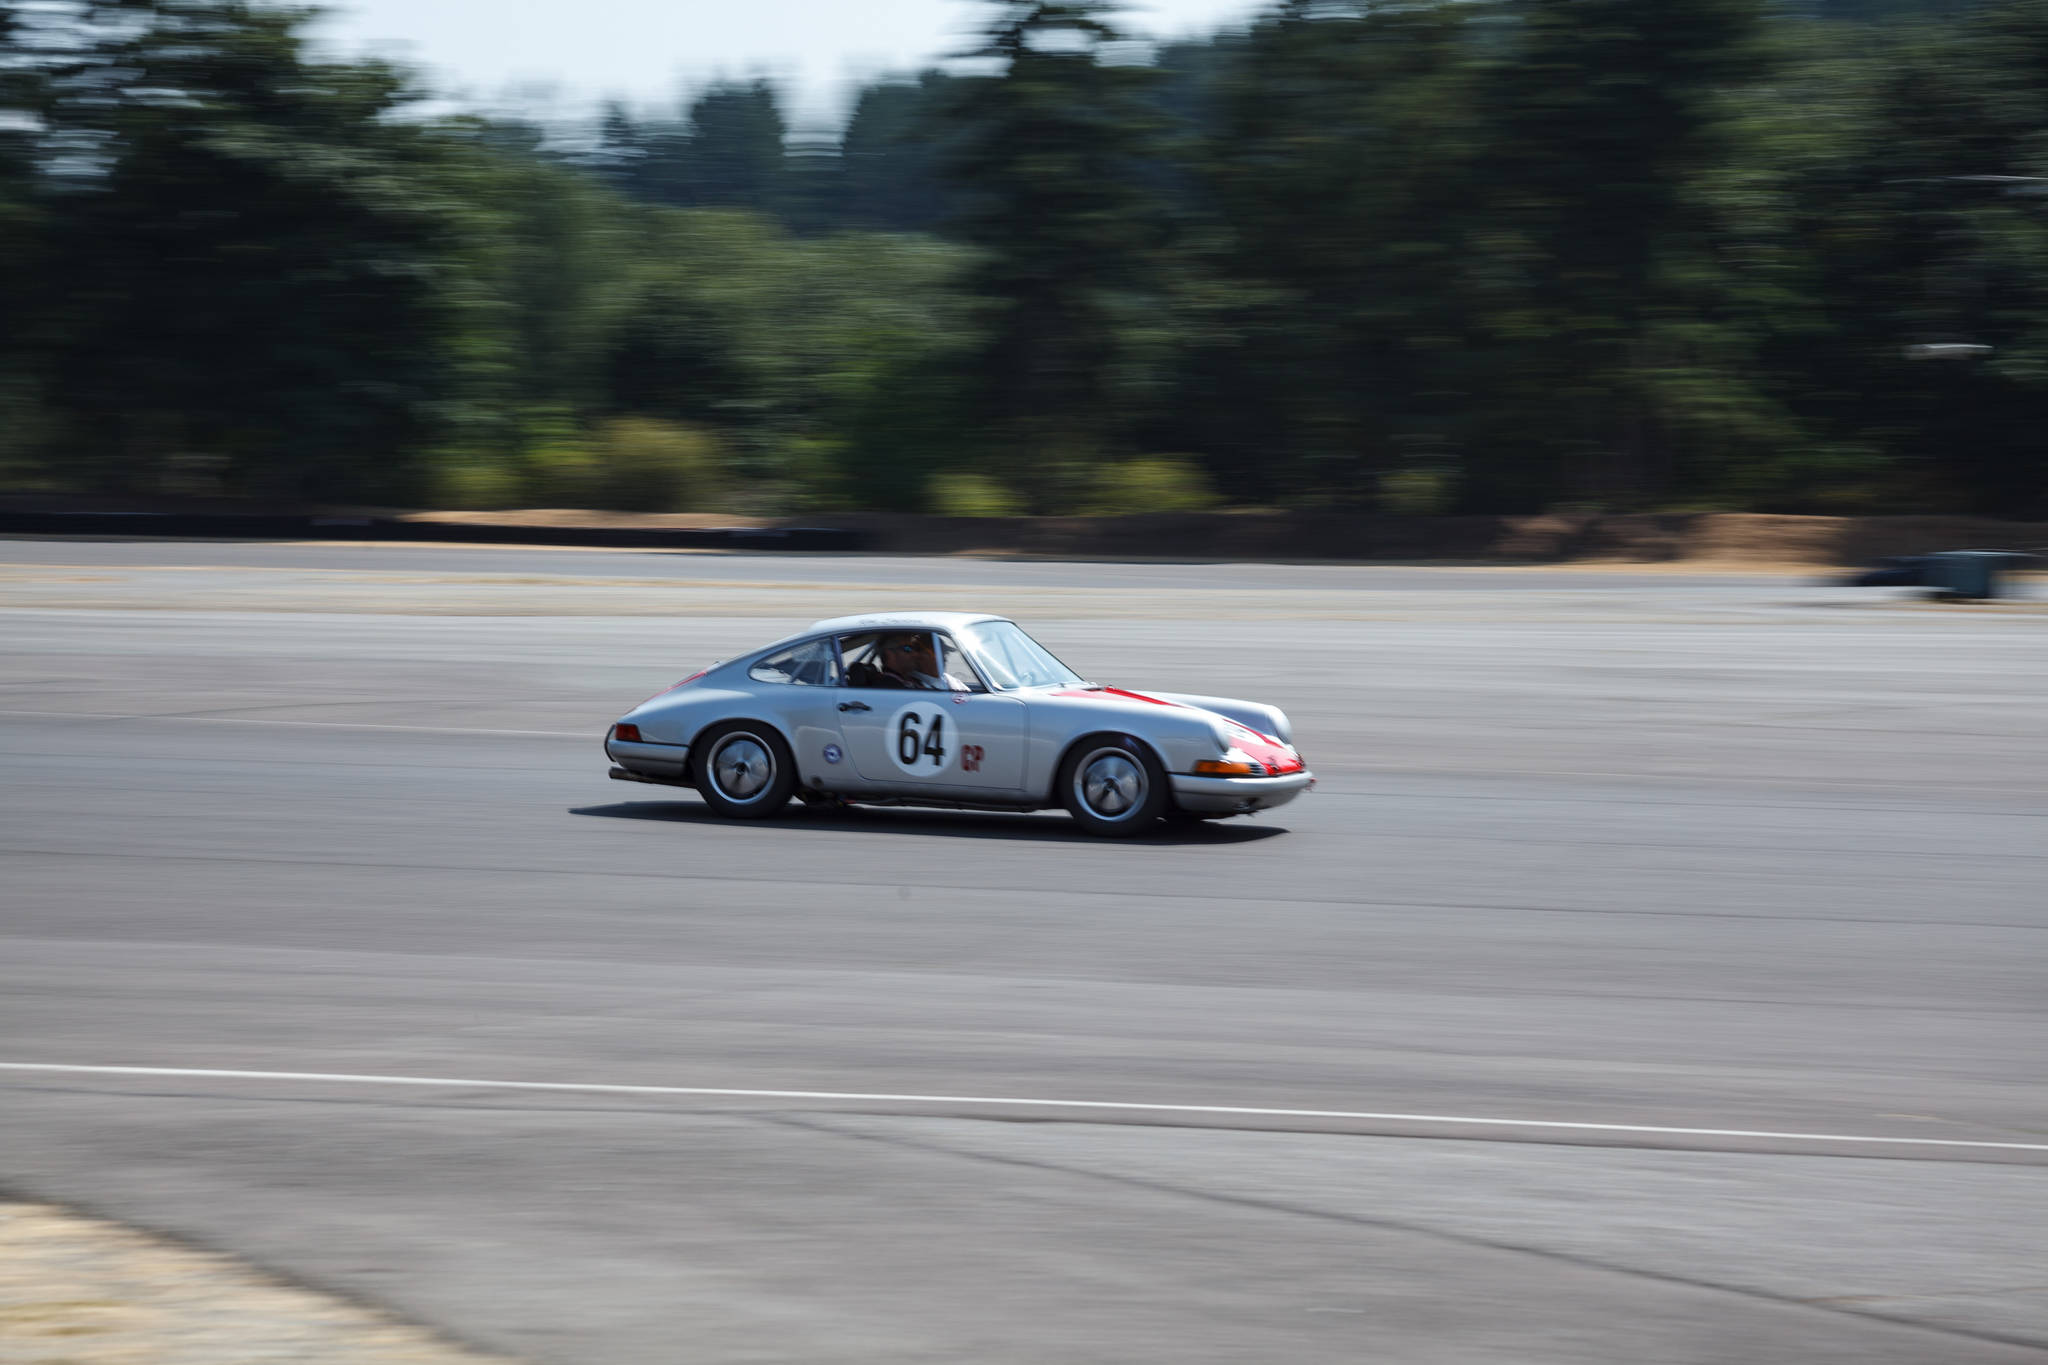 A Porsche does laps around the track during the Pacific Raceways groundbreaking event on Wednesday, Aug. 18, 2021. Photo by Henry Stewart-Wood/Sound Publishing